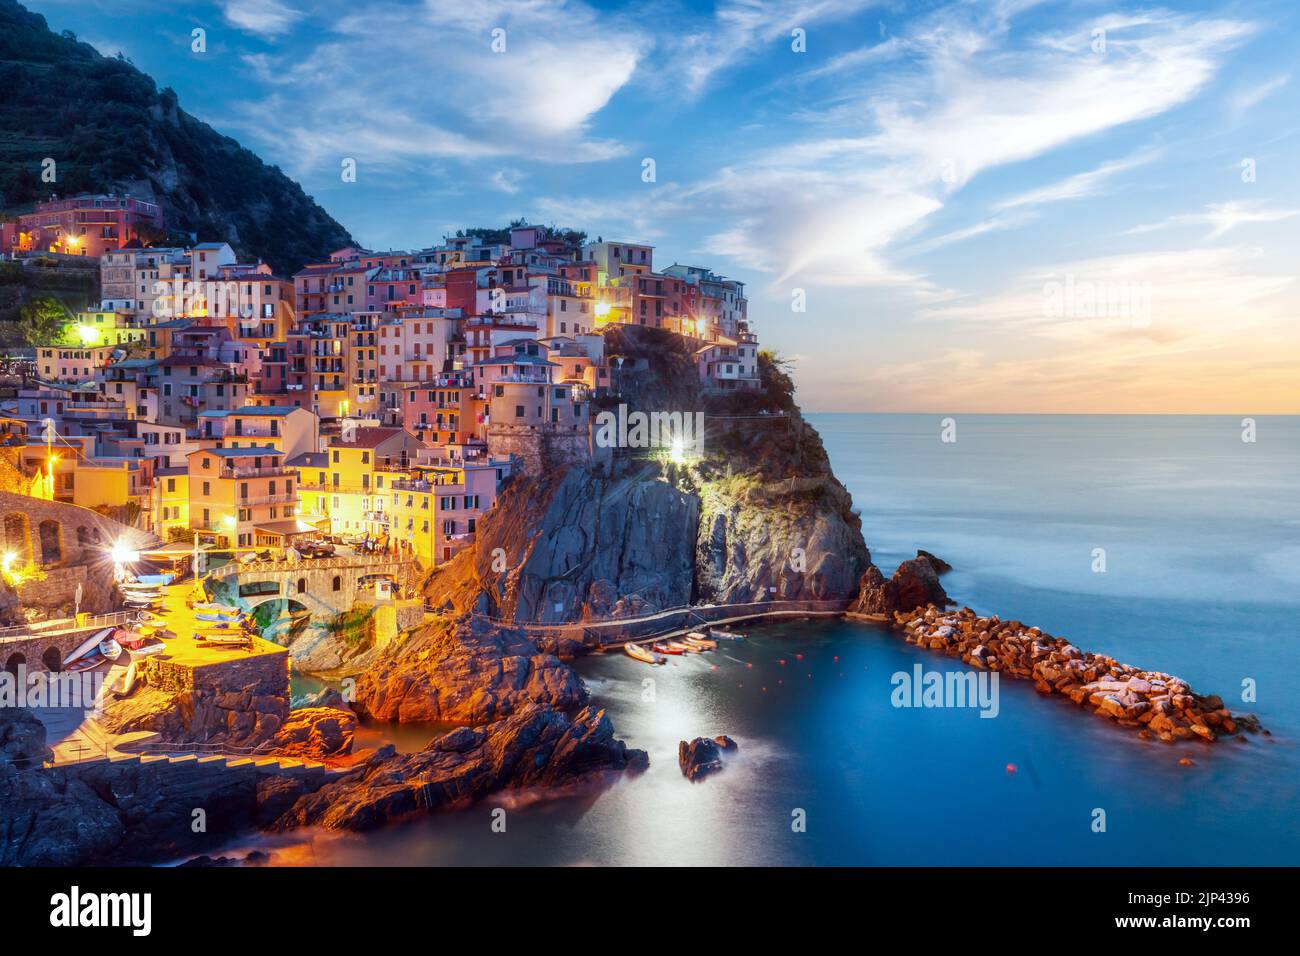 Incredible morning view of Manarola city with costal rocks on a foreground. Cinque Terre National Park, Liguria, Italy, Europe. Landscape photography Stock Photo